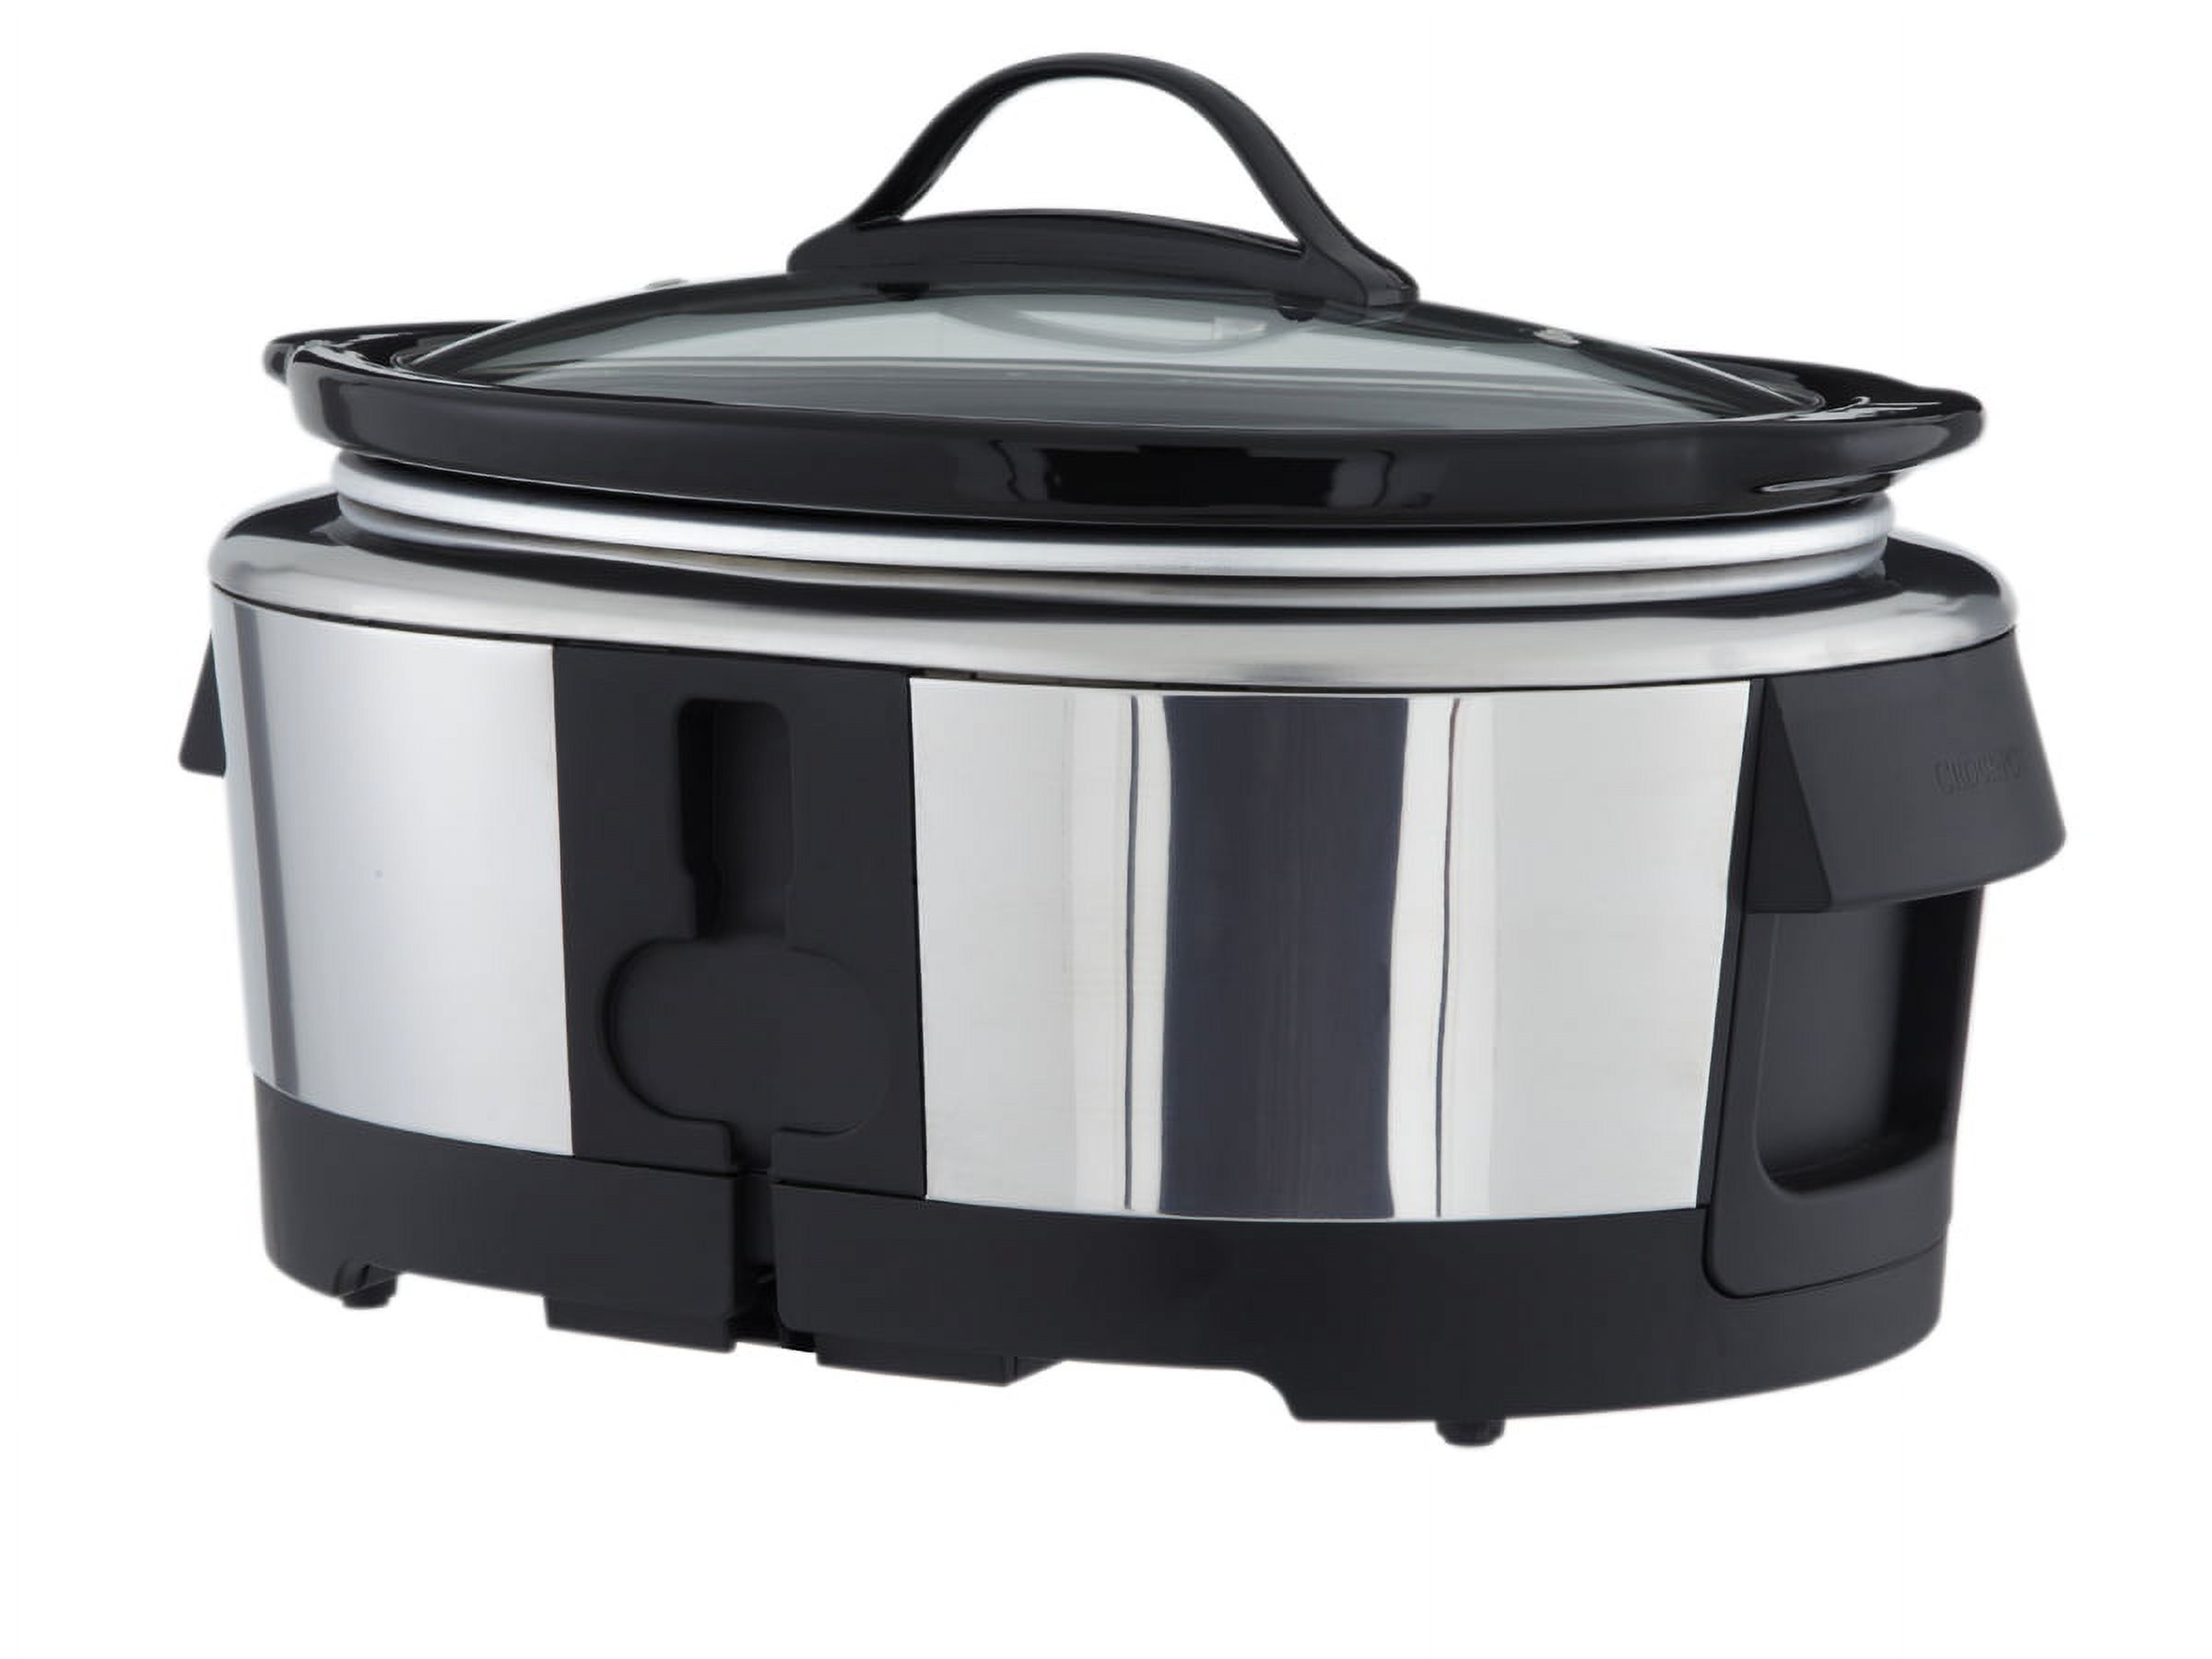 Crock-Pot Wifi-Controlled Smart Slow Cooker Enabled by WeMo, 6-Quart, Stainless Steel (SCCPWM600-V1) - image 2 of 8